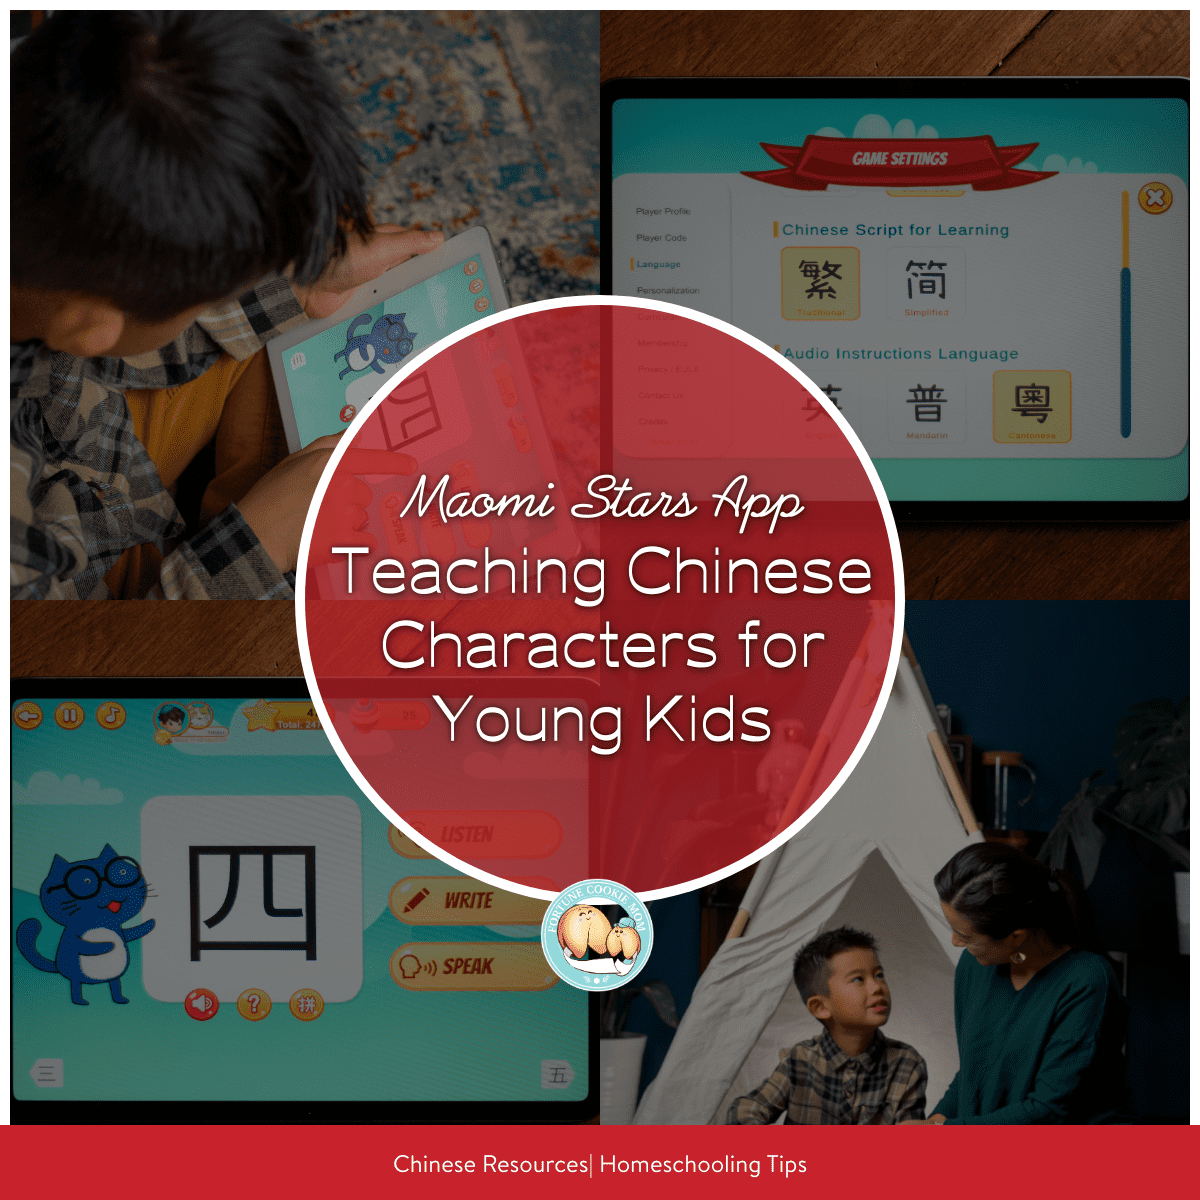 Maomi Stars App Review: Teaching Chinese Characters for Young Kids